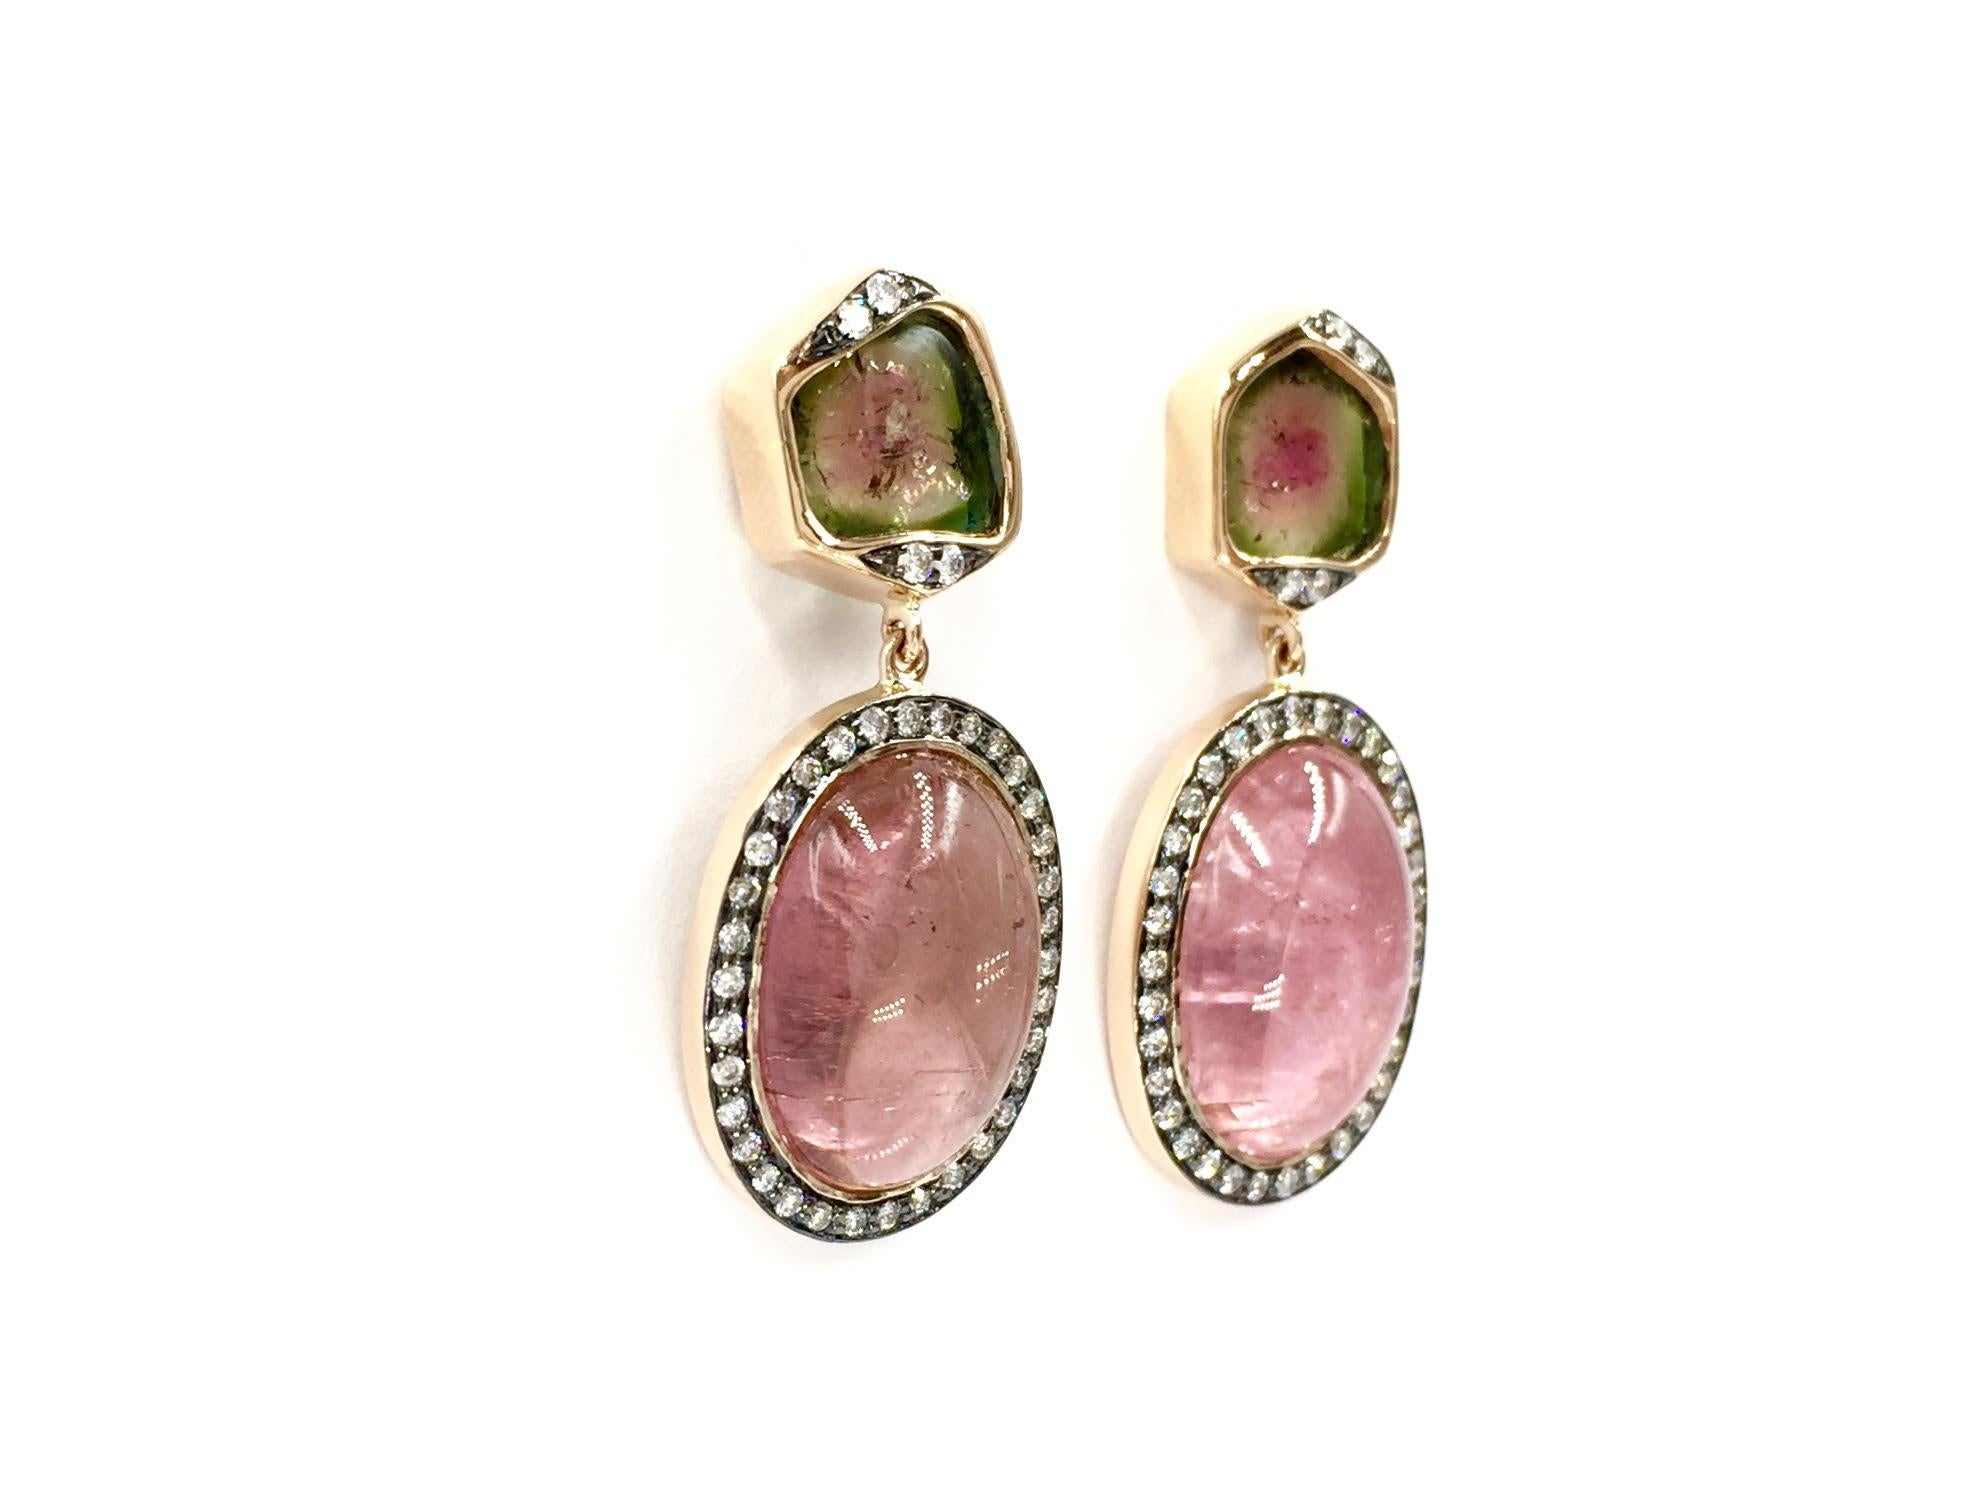 14 karat rose gold natural pink and watermelon tourmaline drop earrings with diamonds by Jenny Perl. Bright white diamonds are set in black rhodium for an unexpected and beautiful contrast, .36 diamond carat total weight. Visible natural